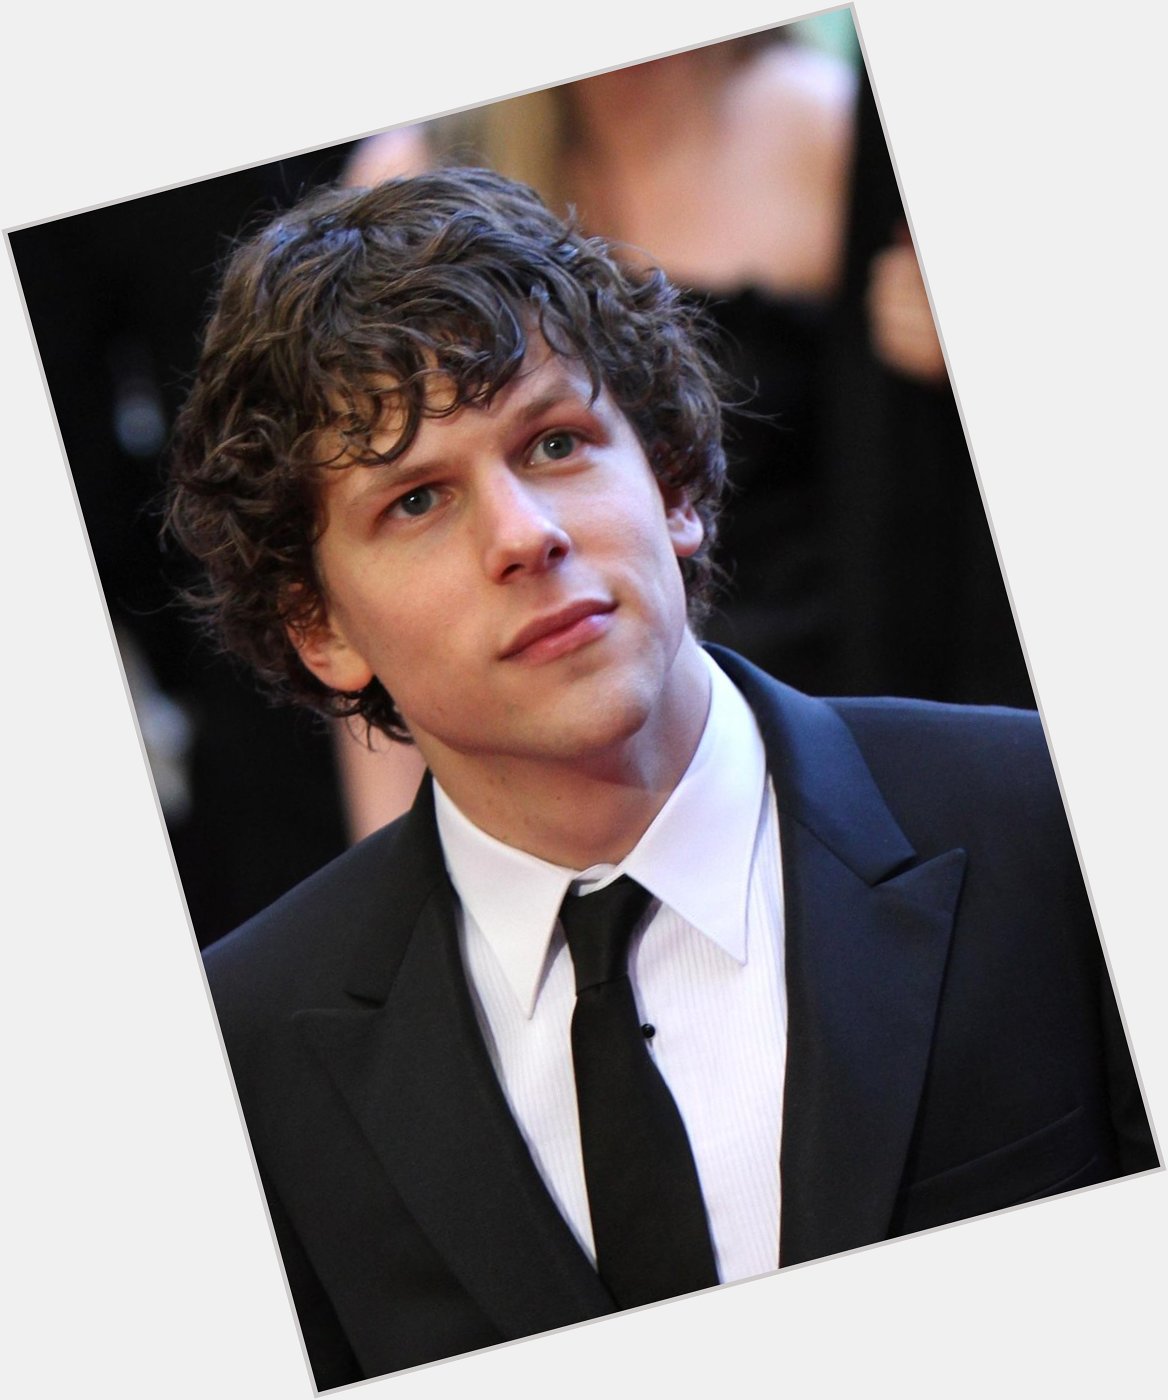 Happy Birthday to the boy who played Mark Zuckerberg in the amazing film The Social Network...Jesse Eisenberg! 